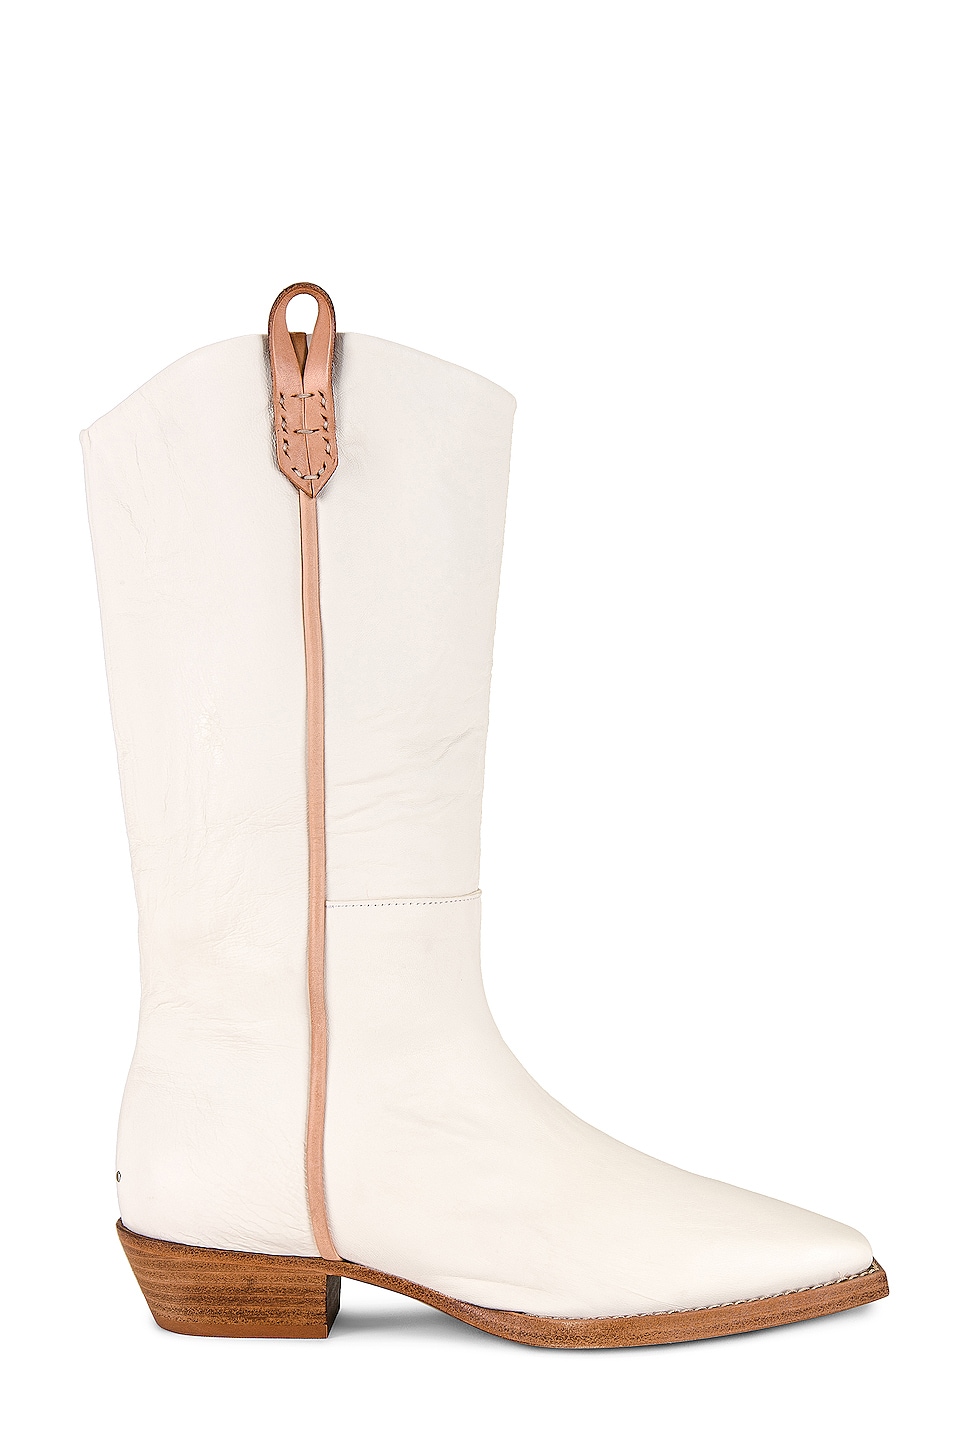 Free People X We The Free Montage Tall Boot in Bone